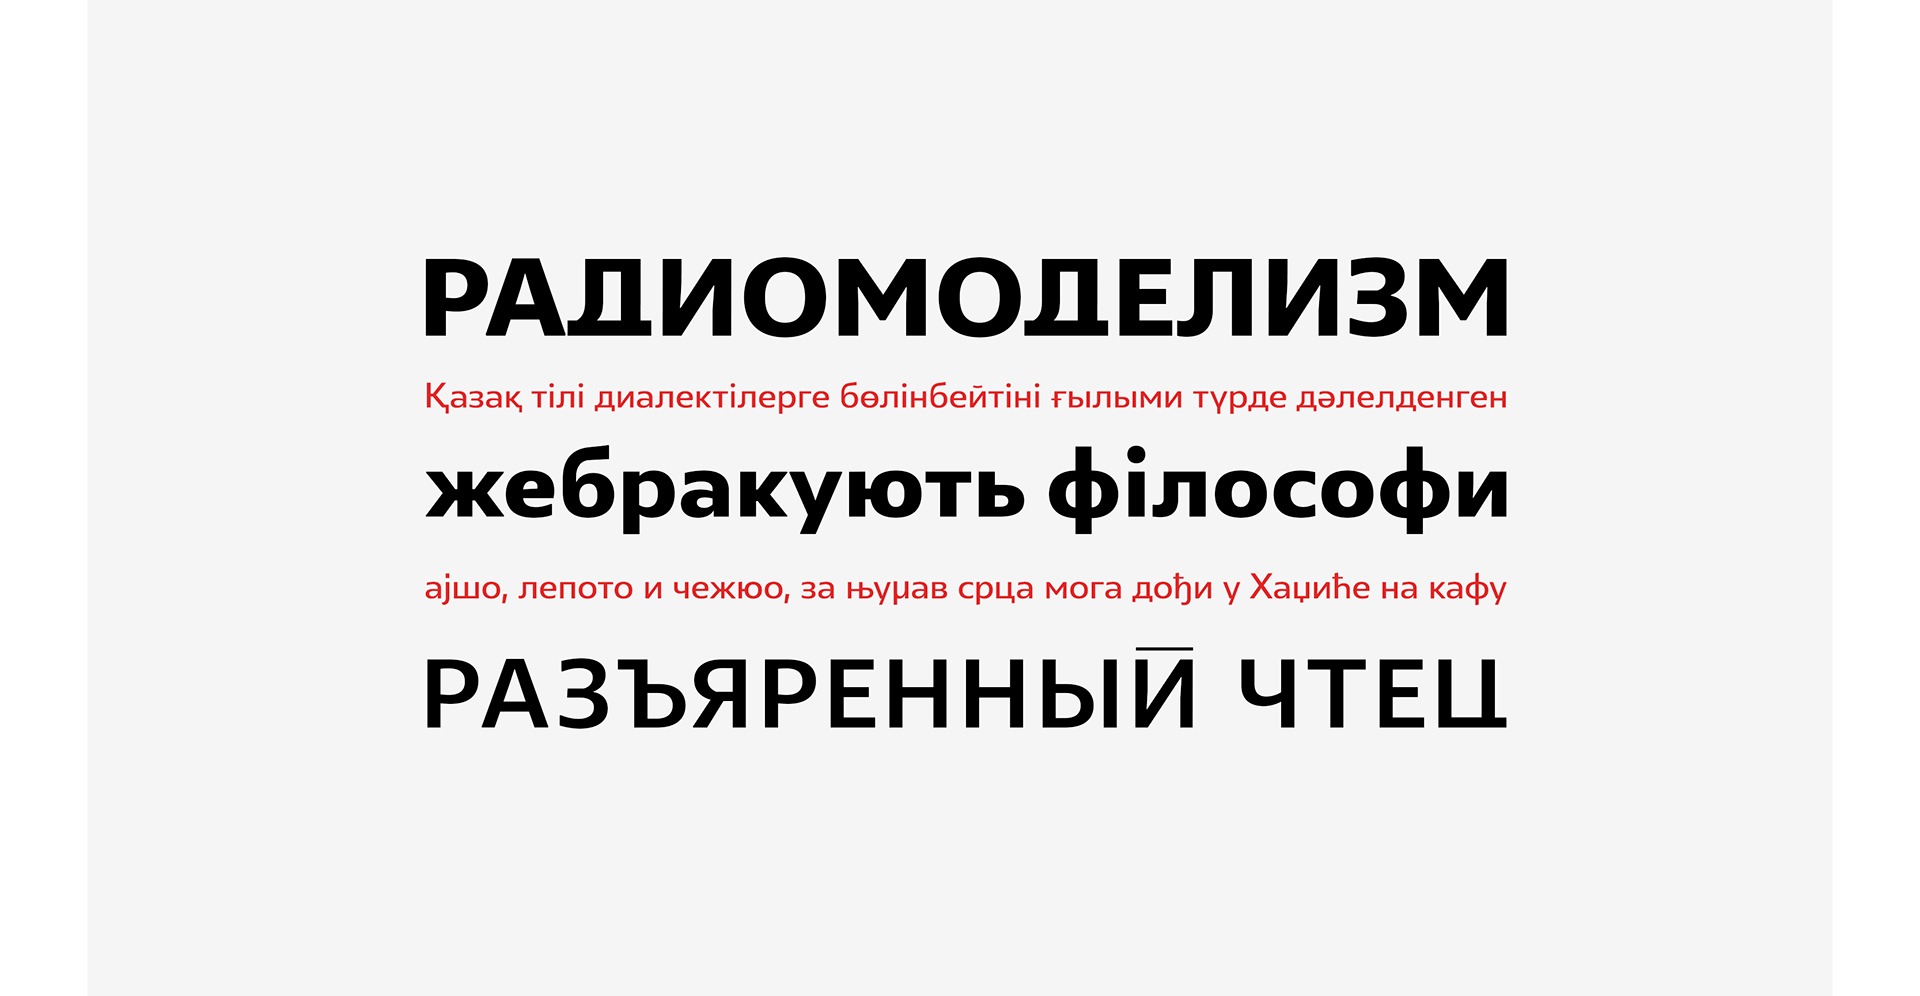 Lexis ThinItalic Font preview